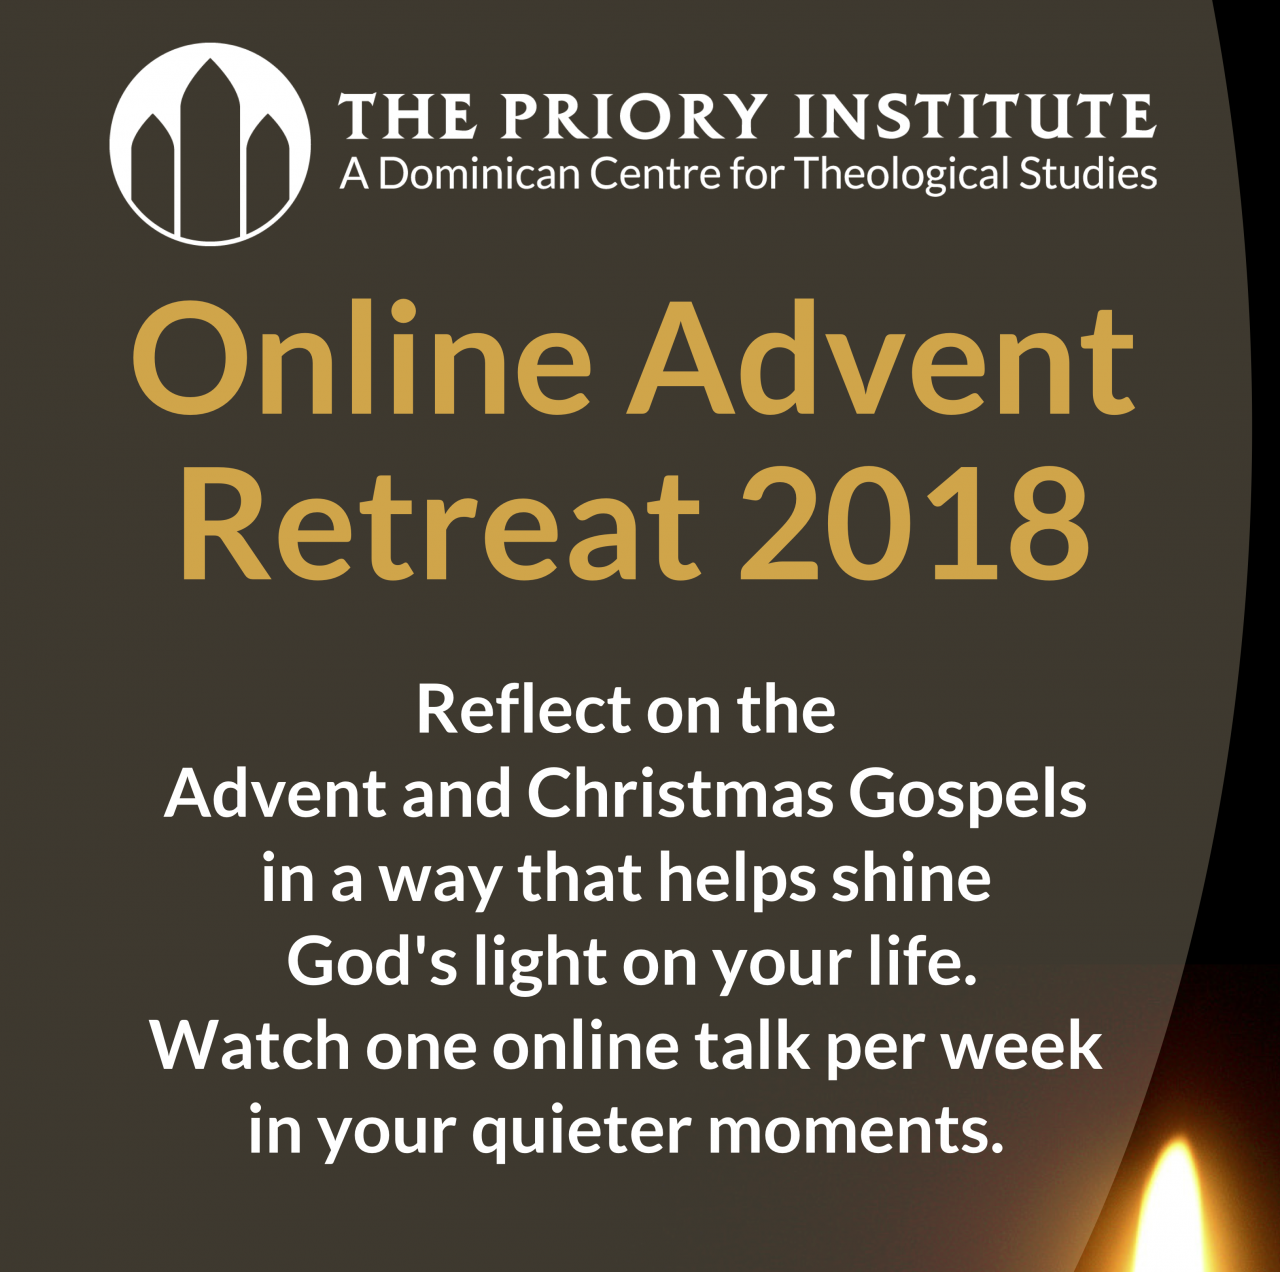 Online Advent Retreat hosted by the Priory Institute, starts Sunday 2nd December 2018